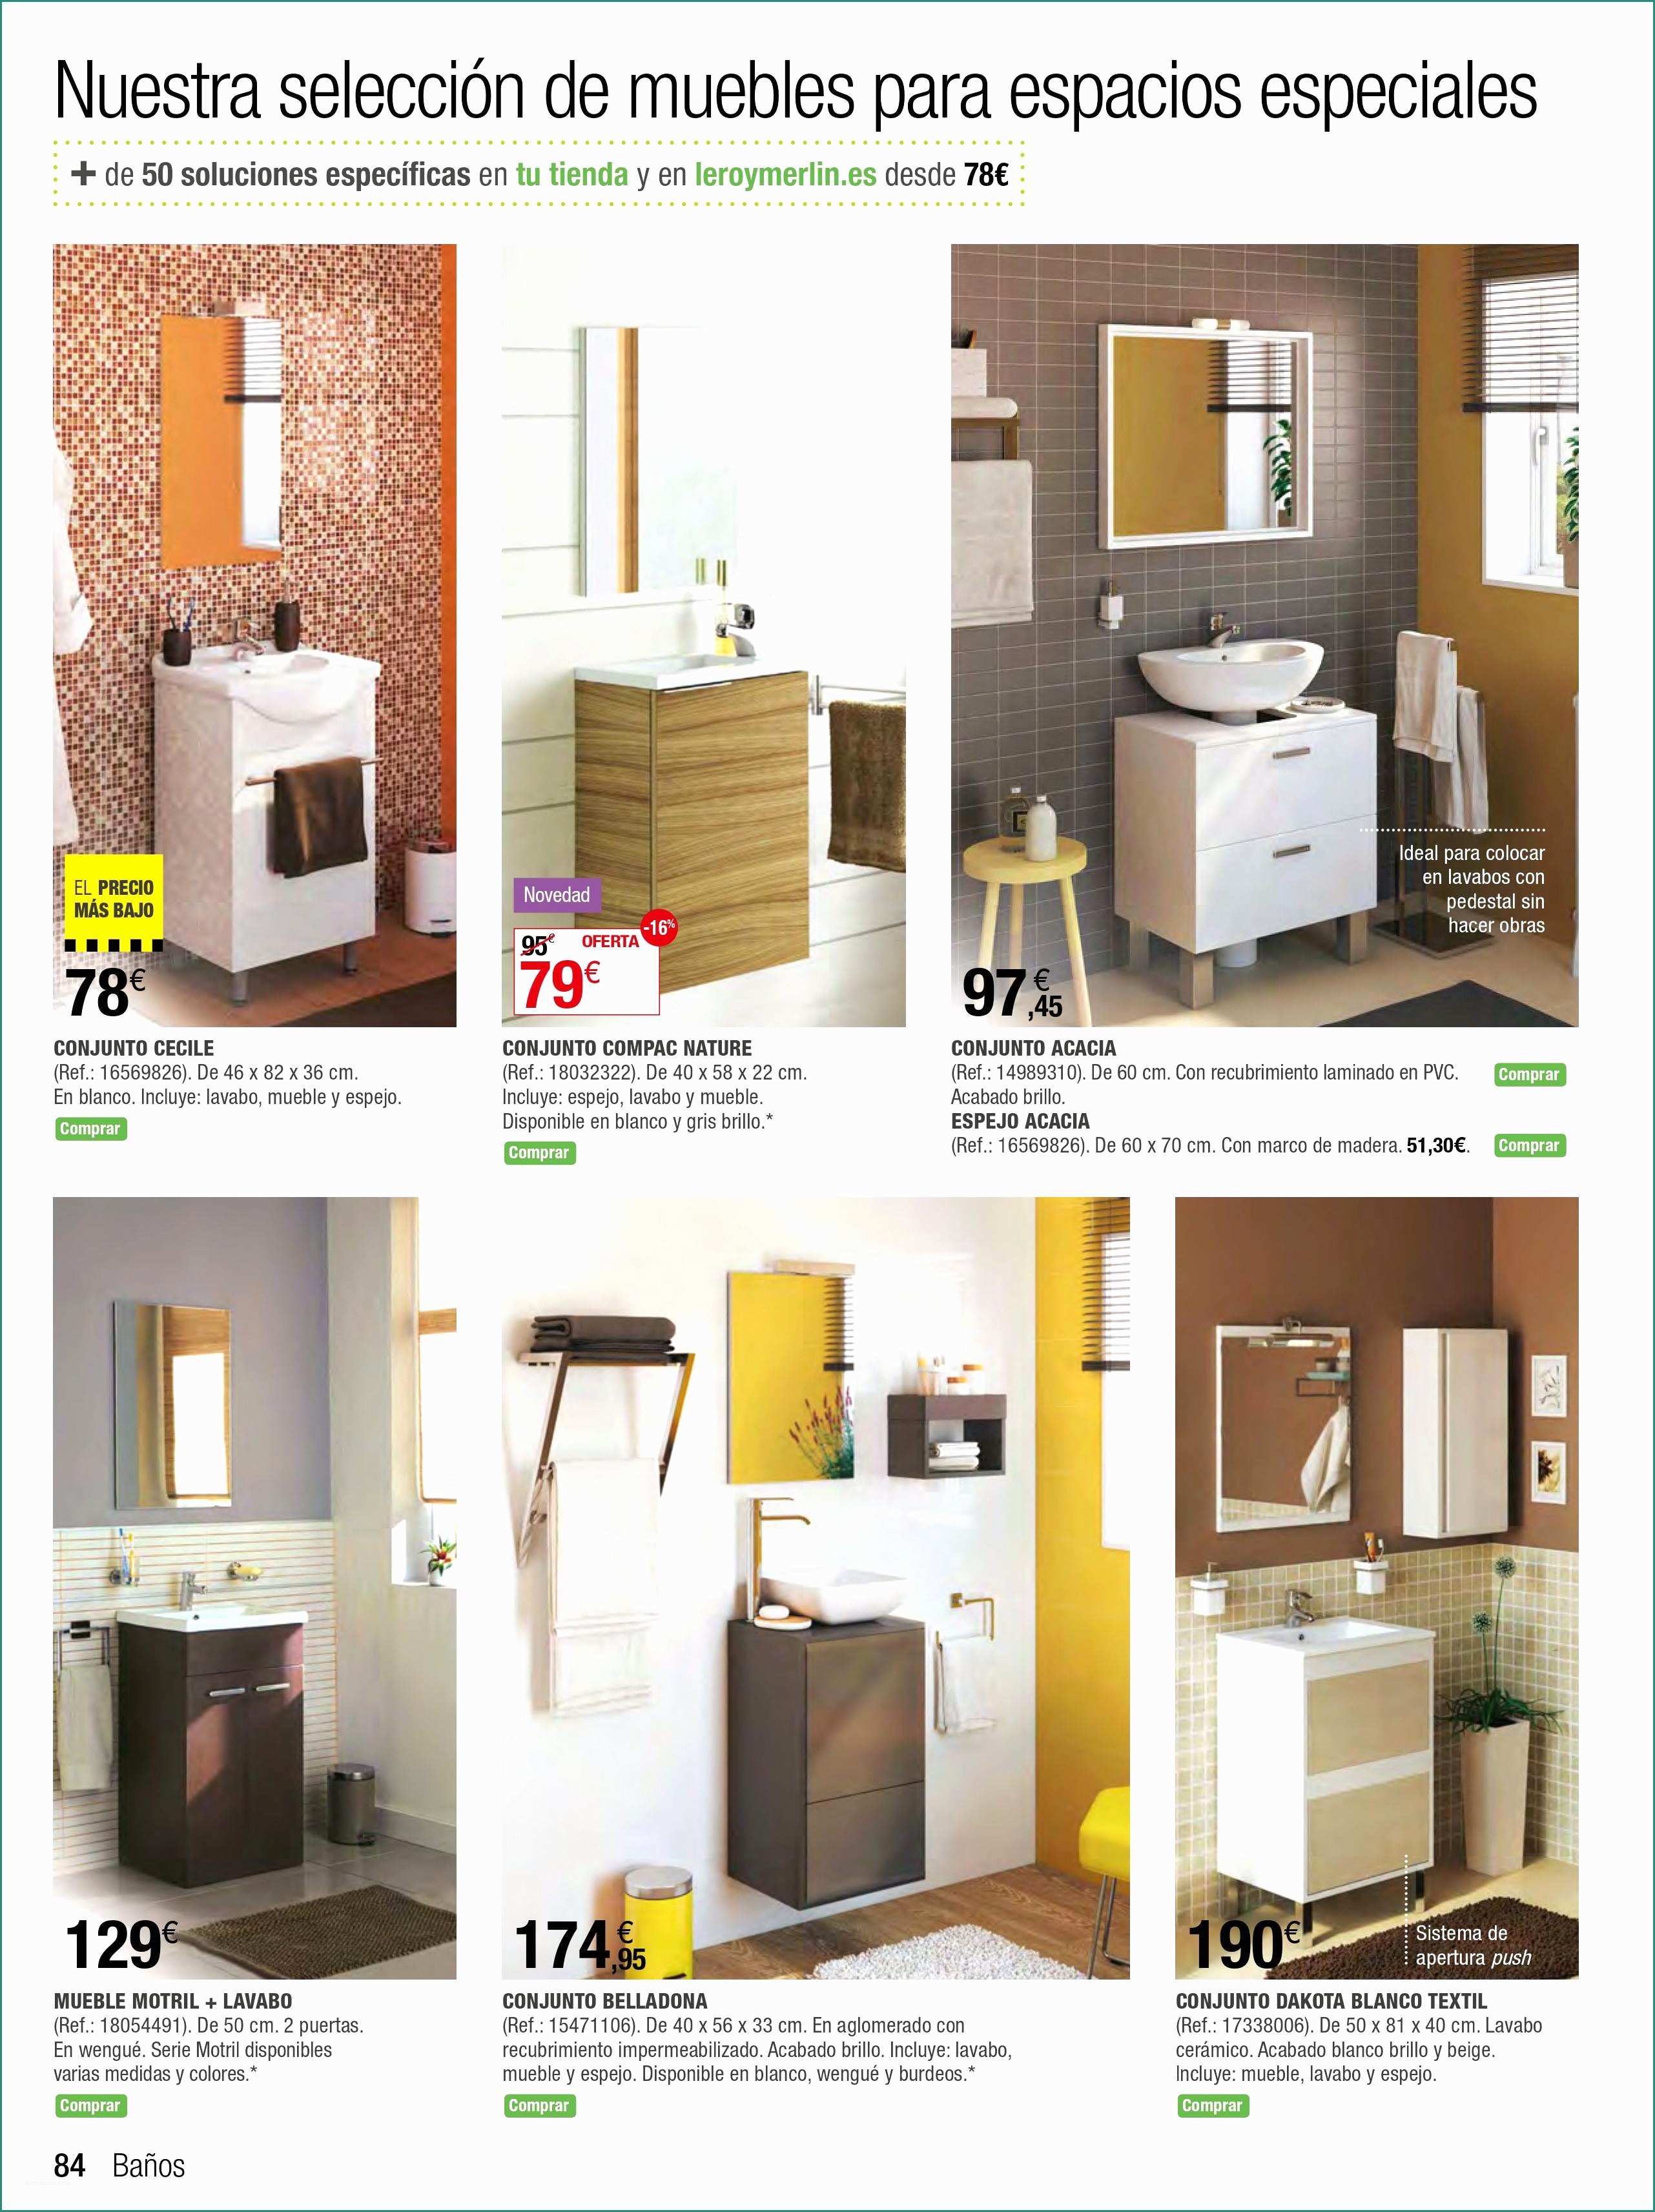 Tettoie In Legno Leroy Merlin E Chalet Pvc Leroy Merlin Awesome Gallery Affordable sol Con Con